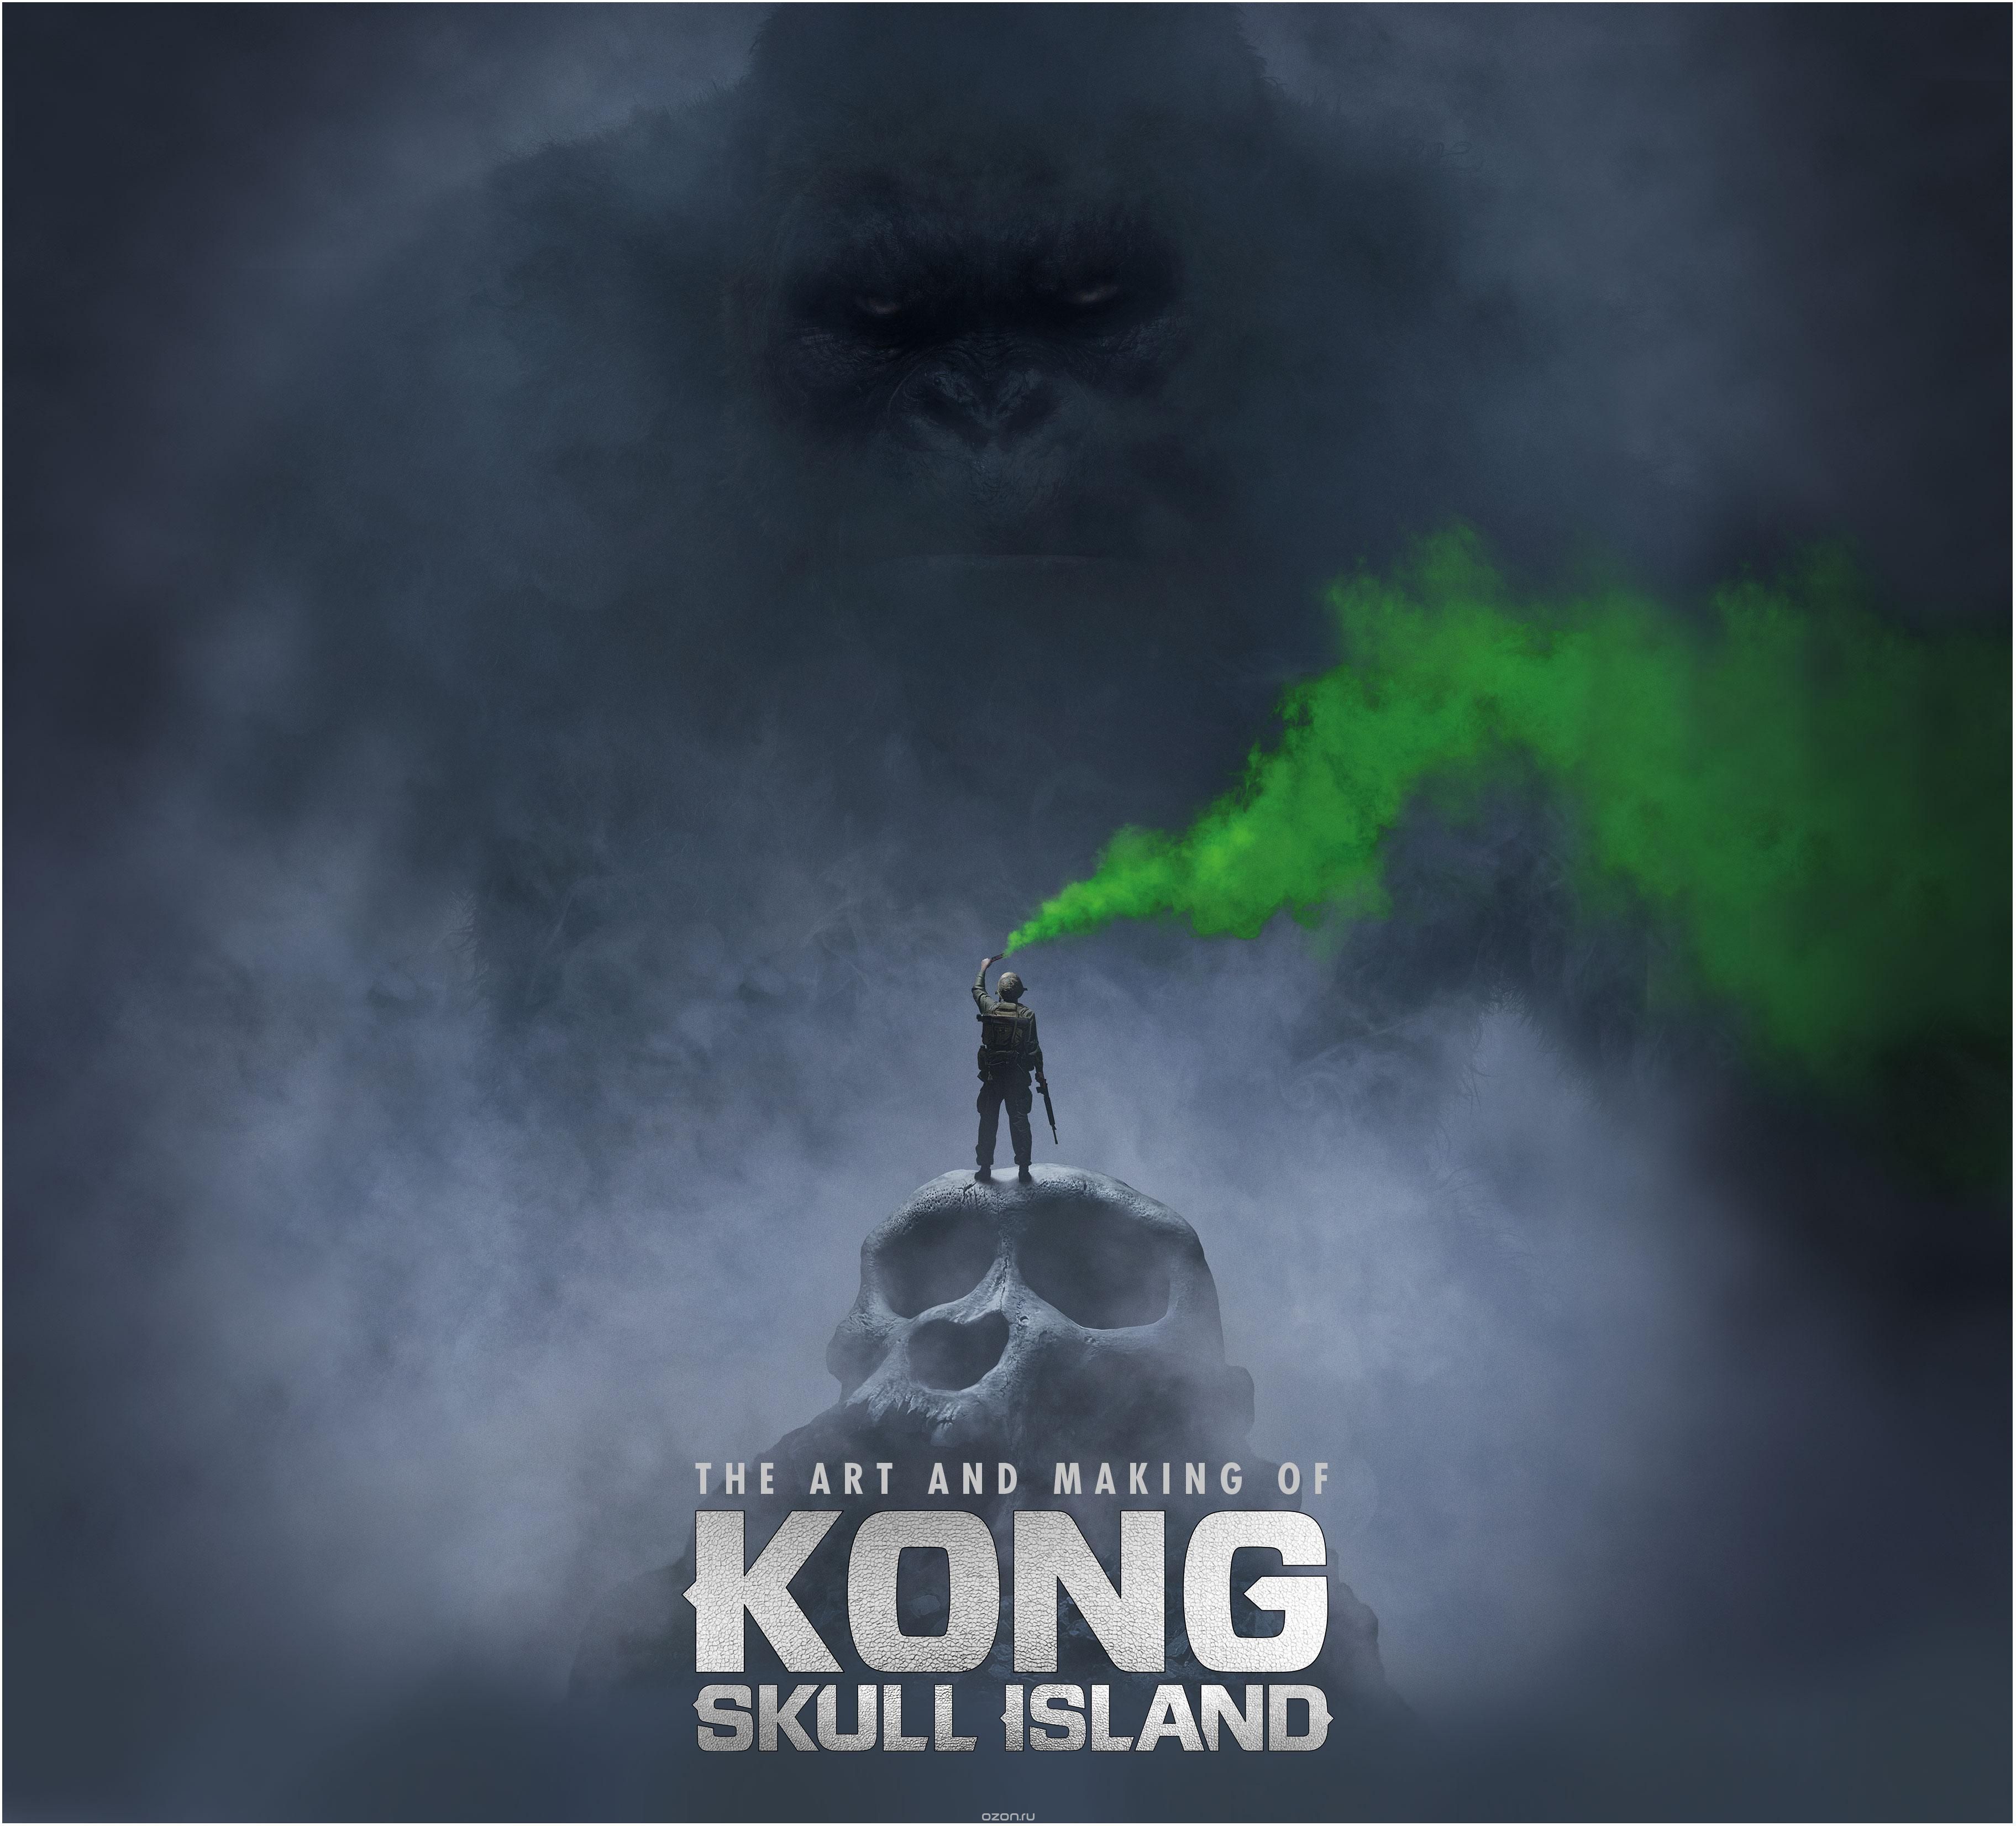 The Art and Making of Kong: Skull Island